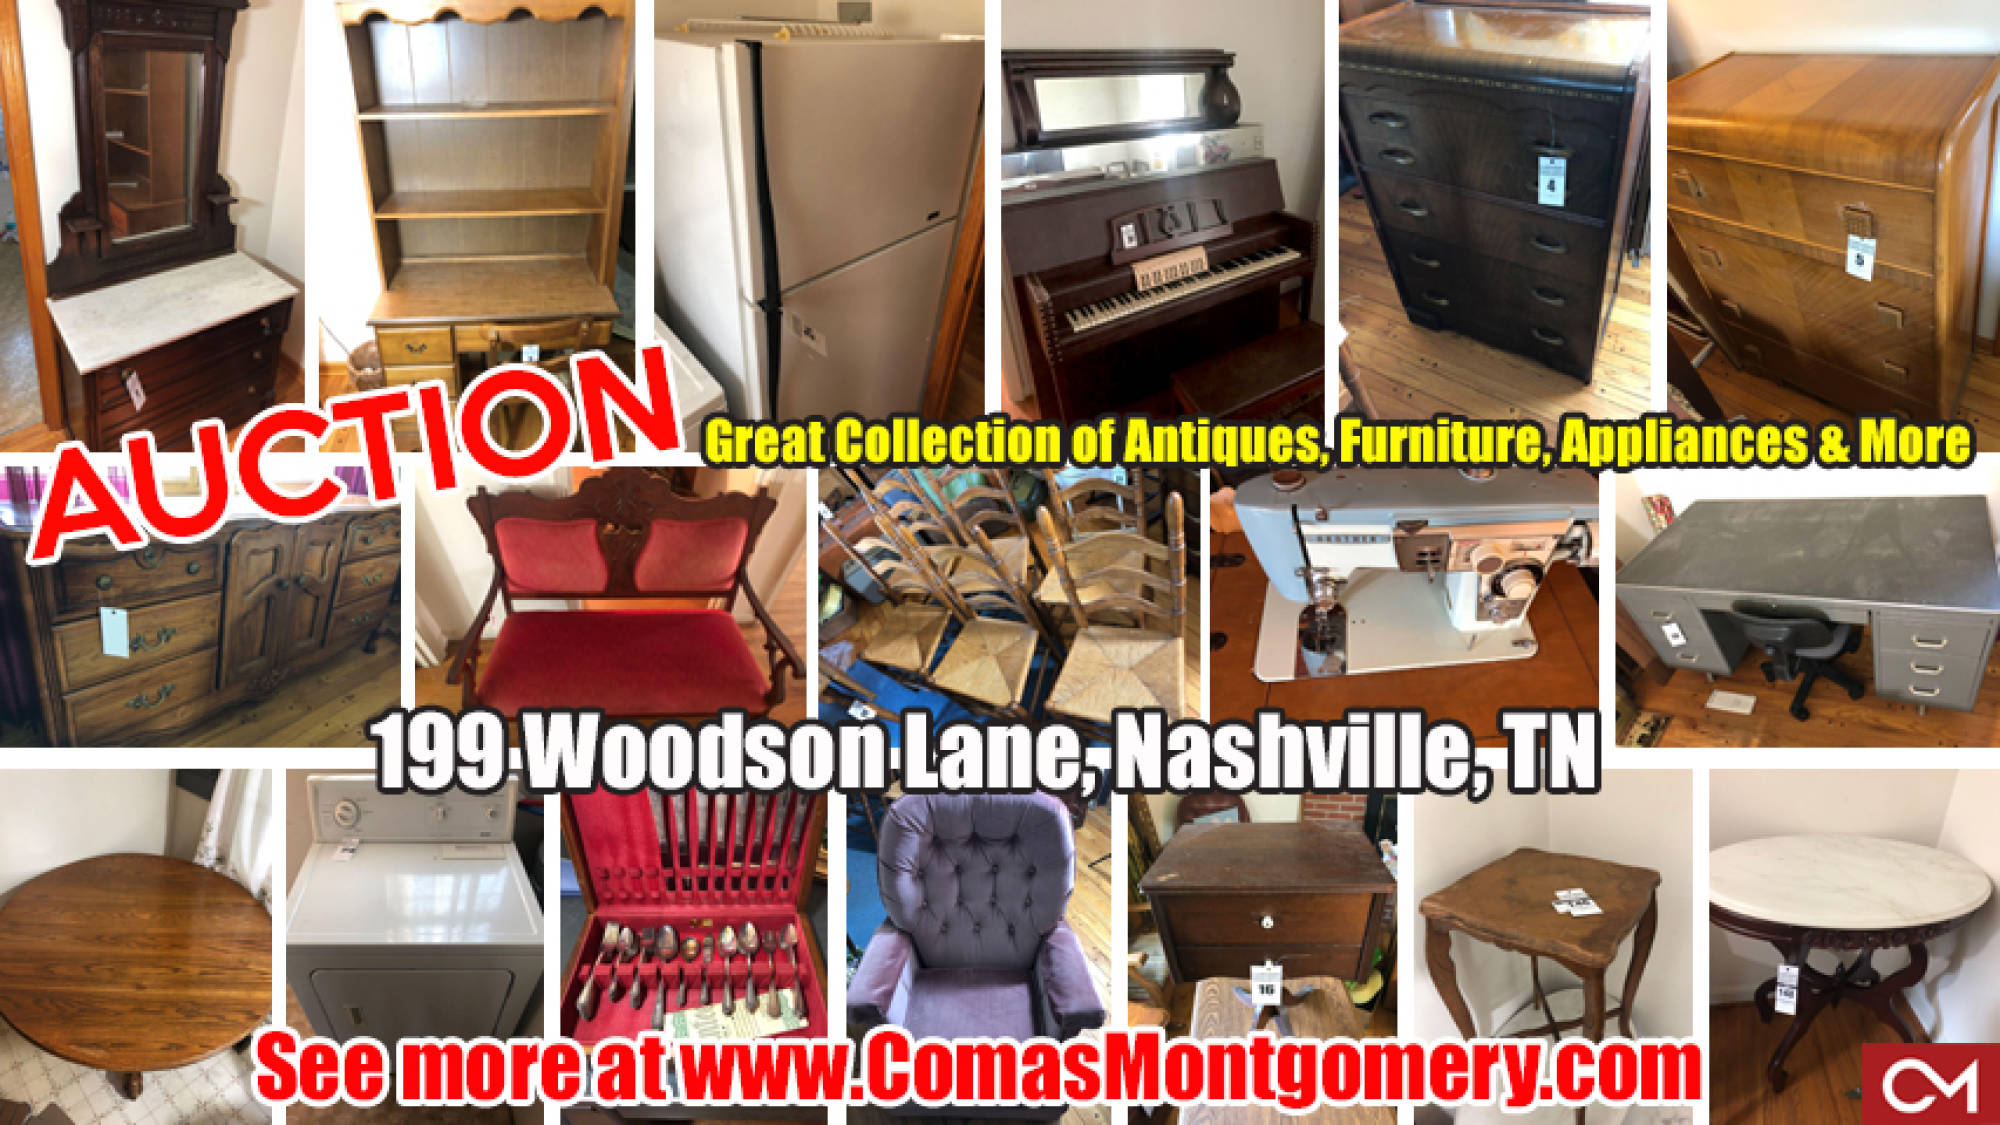 Estate, Sale, Auction, Furniture, Antiques, Appliances, For Sale, Sewing, Piano, Silverware, Comas, Montgomery, Table, Chairs, Tennessee, Nashville